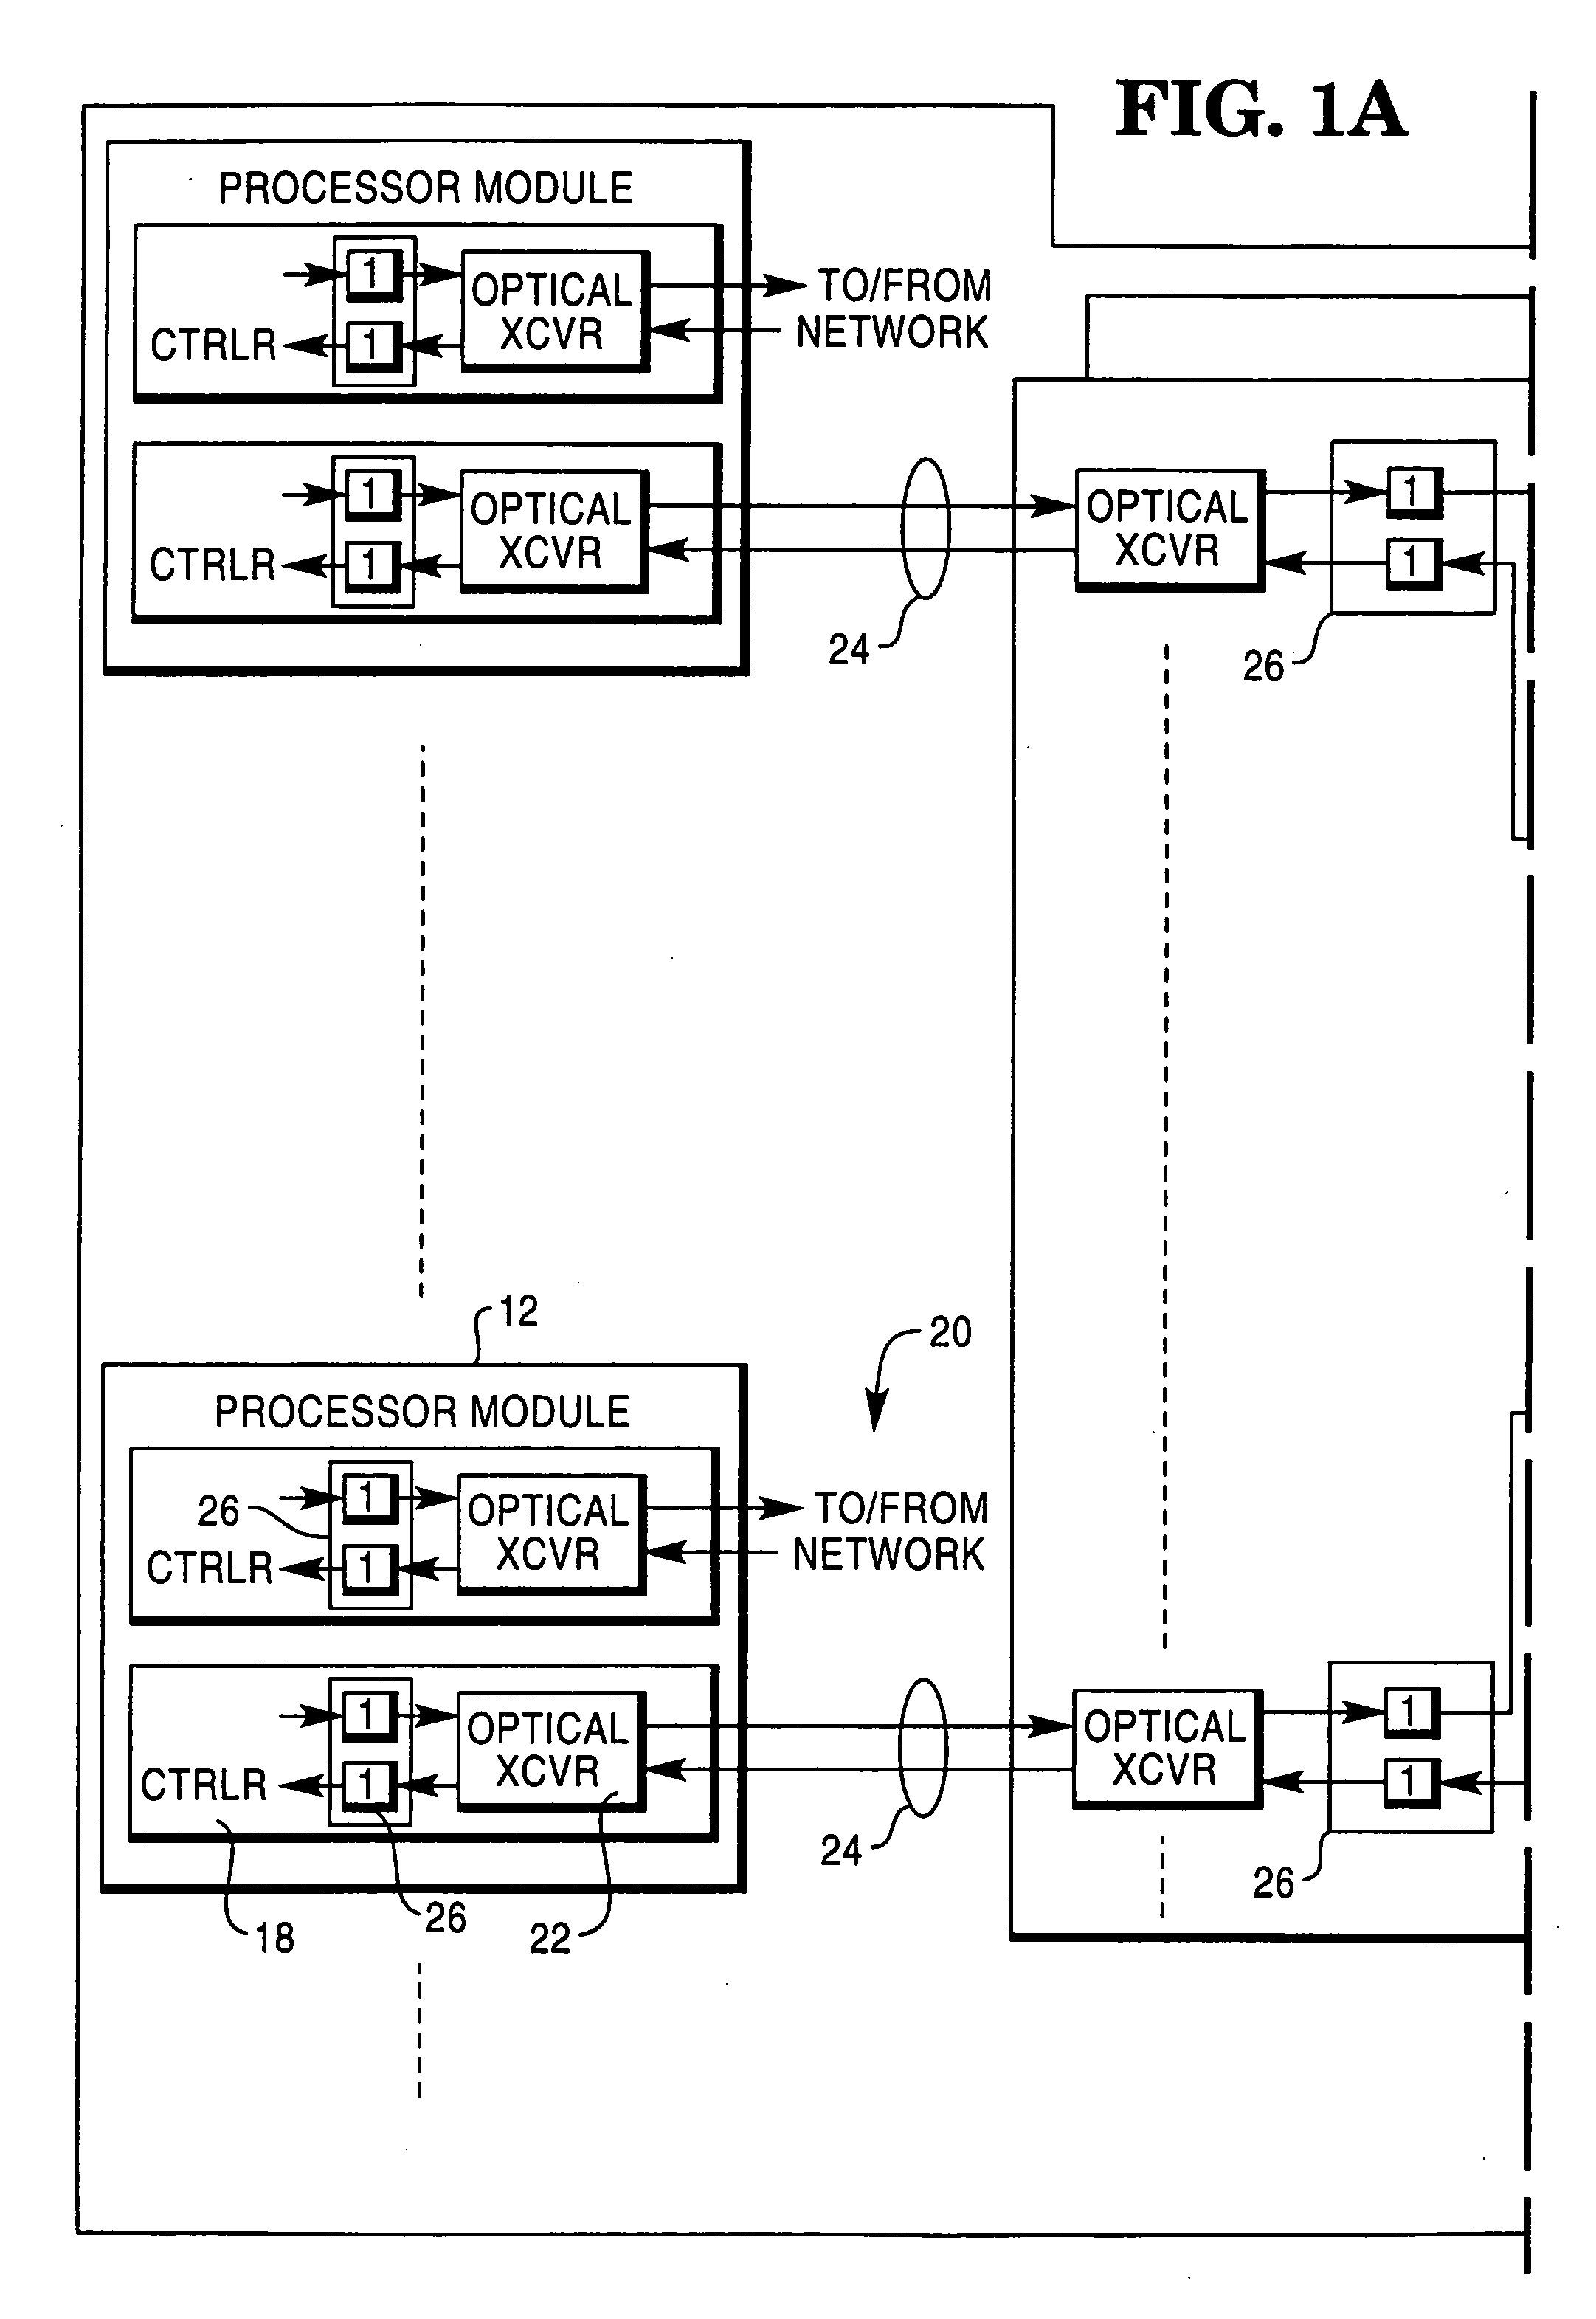 Reconfigurable, fault tolerant, multistage interconnect network and protocol